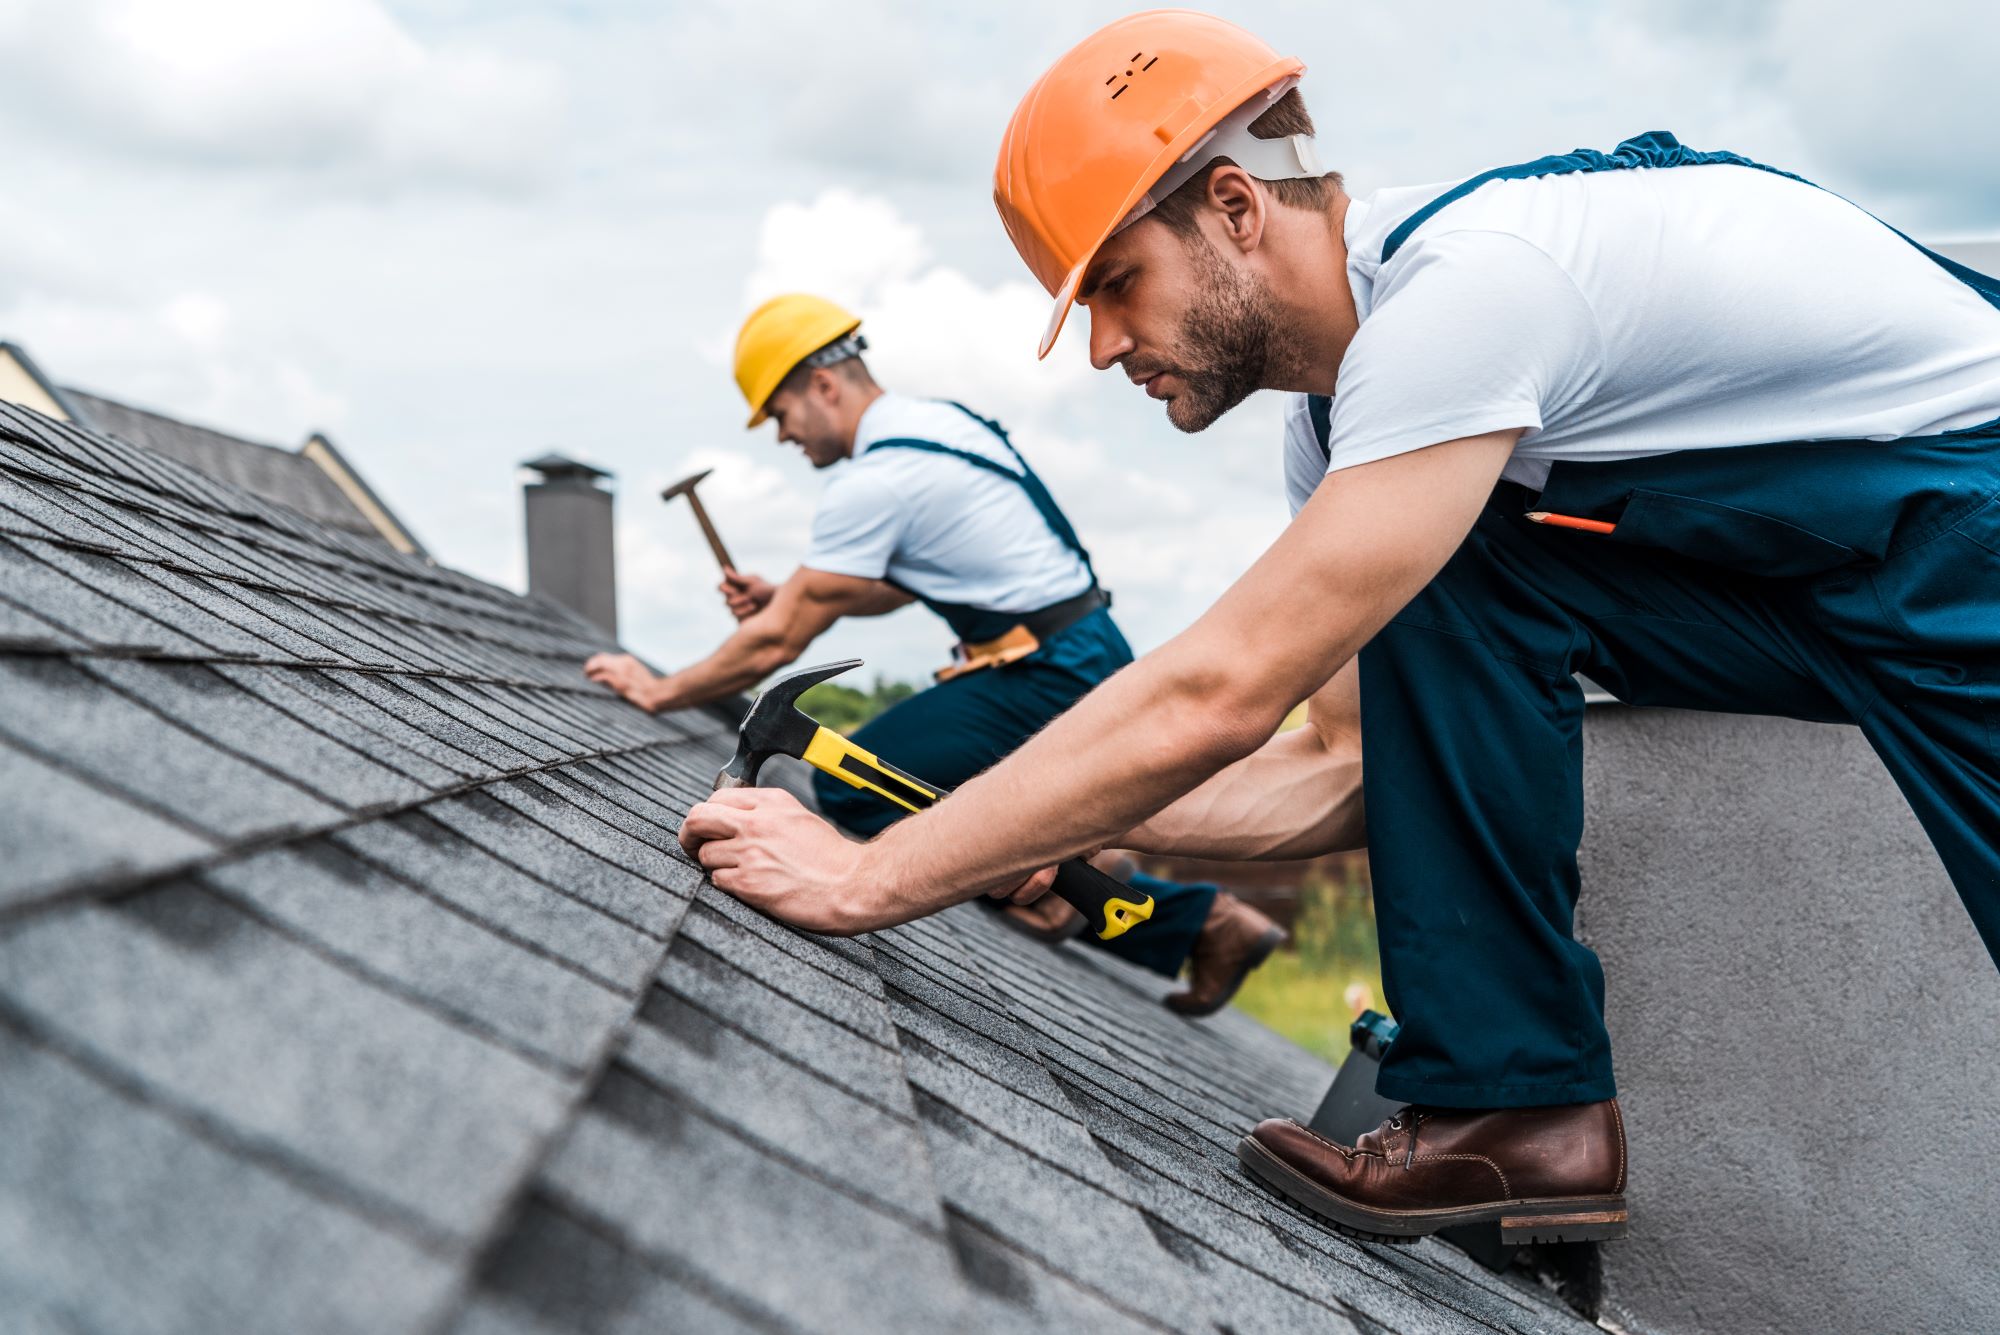 6 Roof Repairs You Should Leave To The Pros